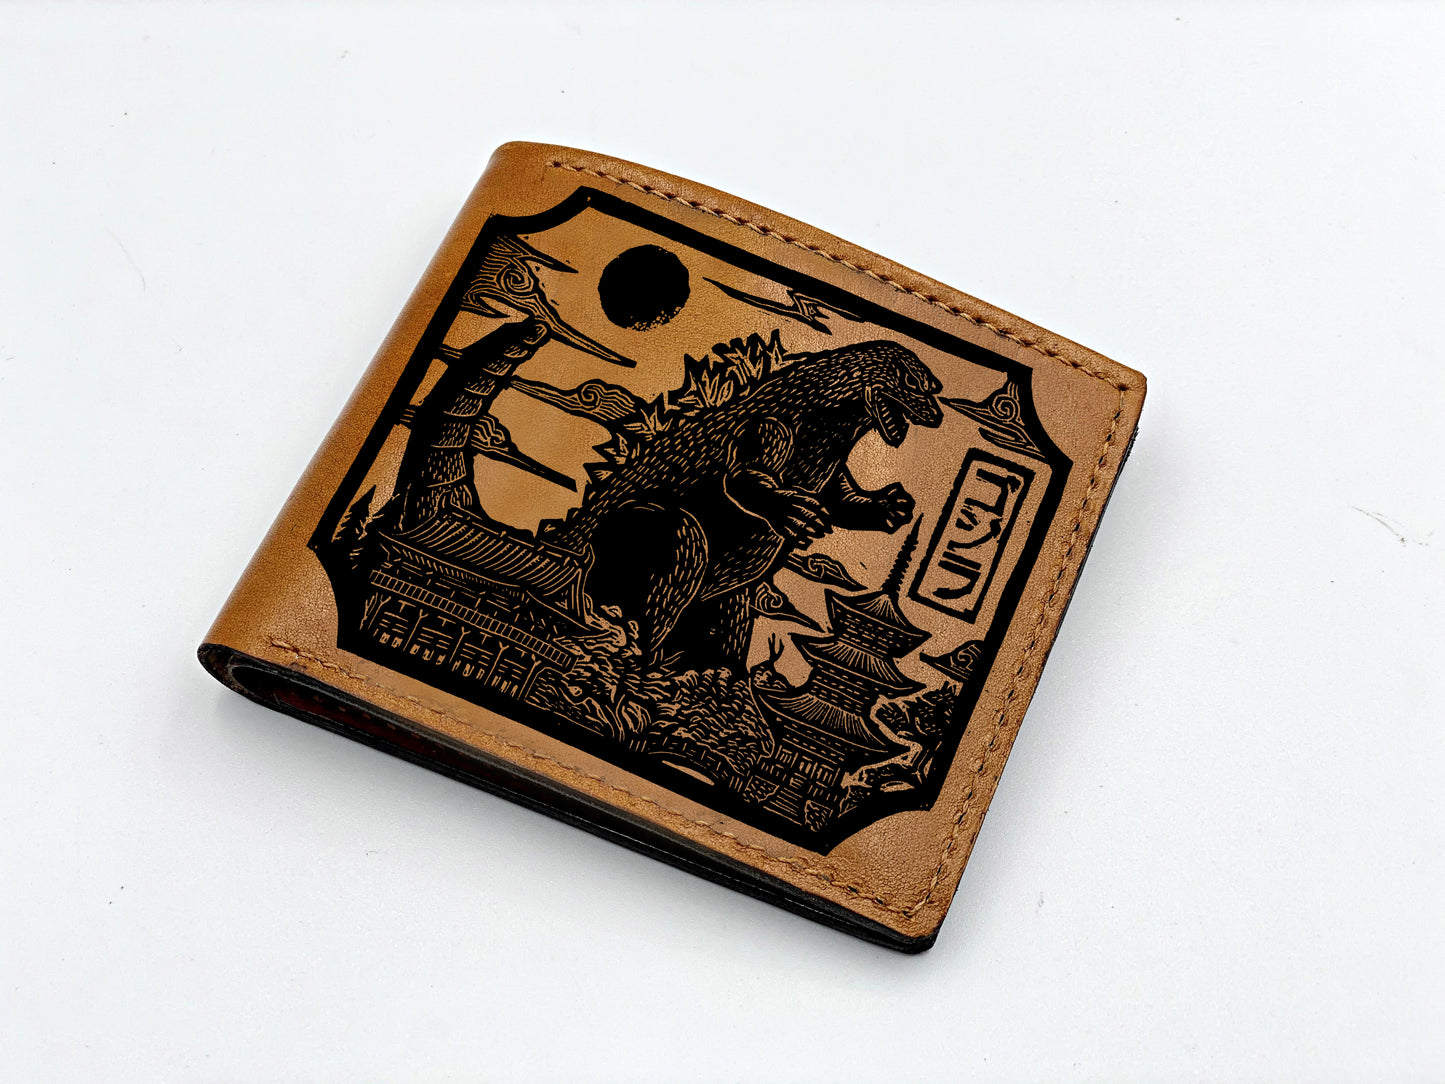 Mayan Corner - Monster leather men's wallet, Godzilla wallet for him, King of the monster leather anniversary gifts for boyfriend